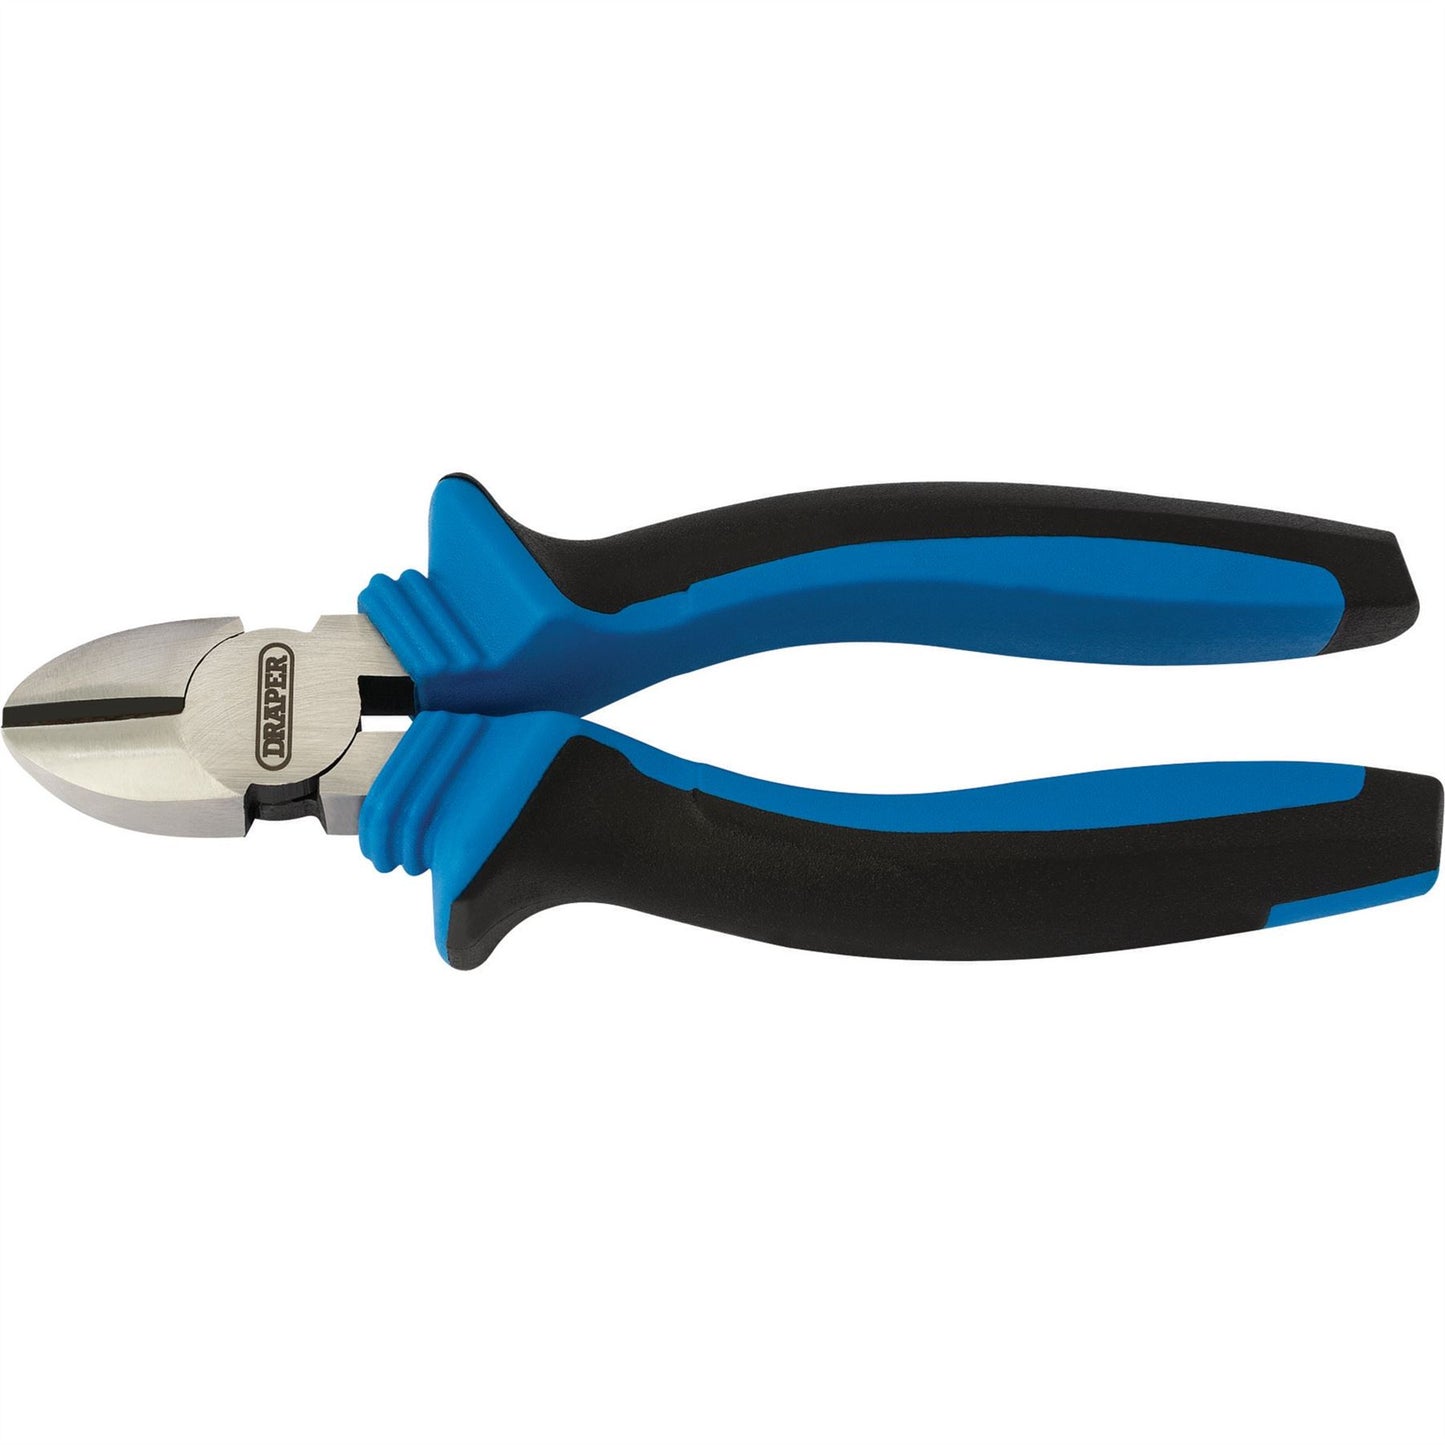 Draper 160mm Diagonal Side Cutters Wire Cable Cutting Soft Grip Pliers - 44145